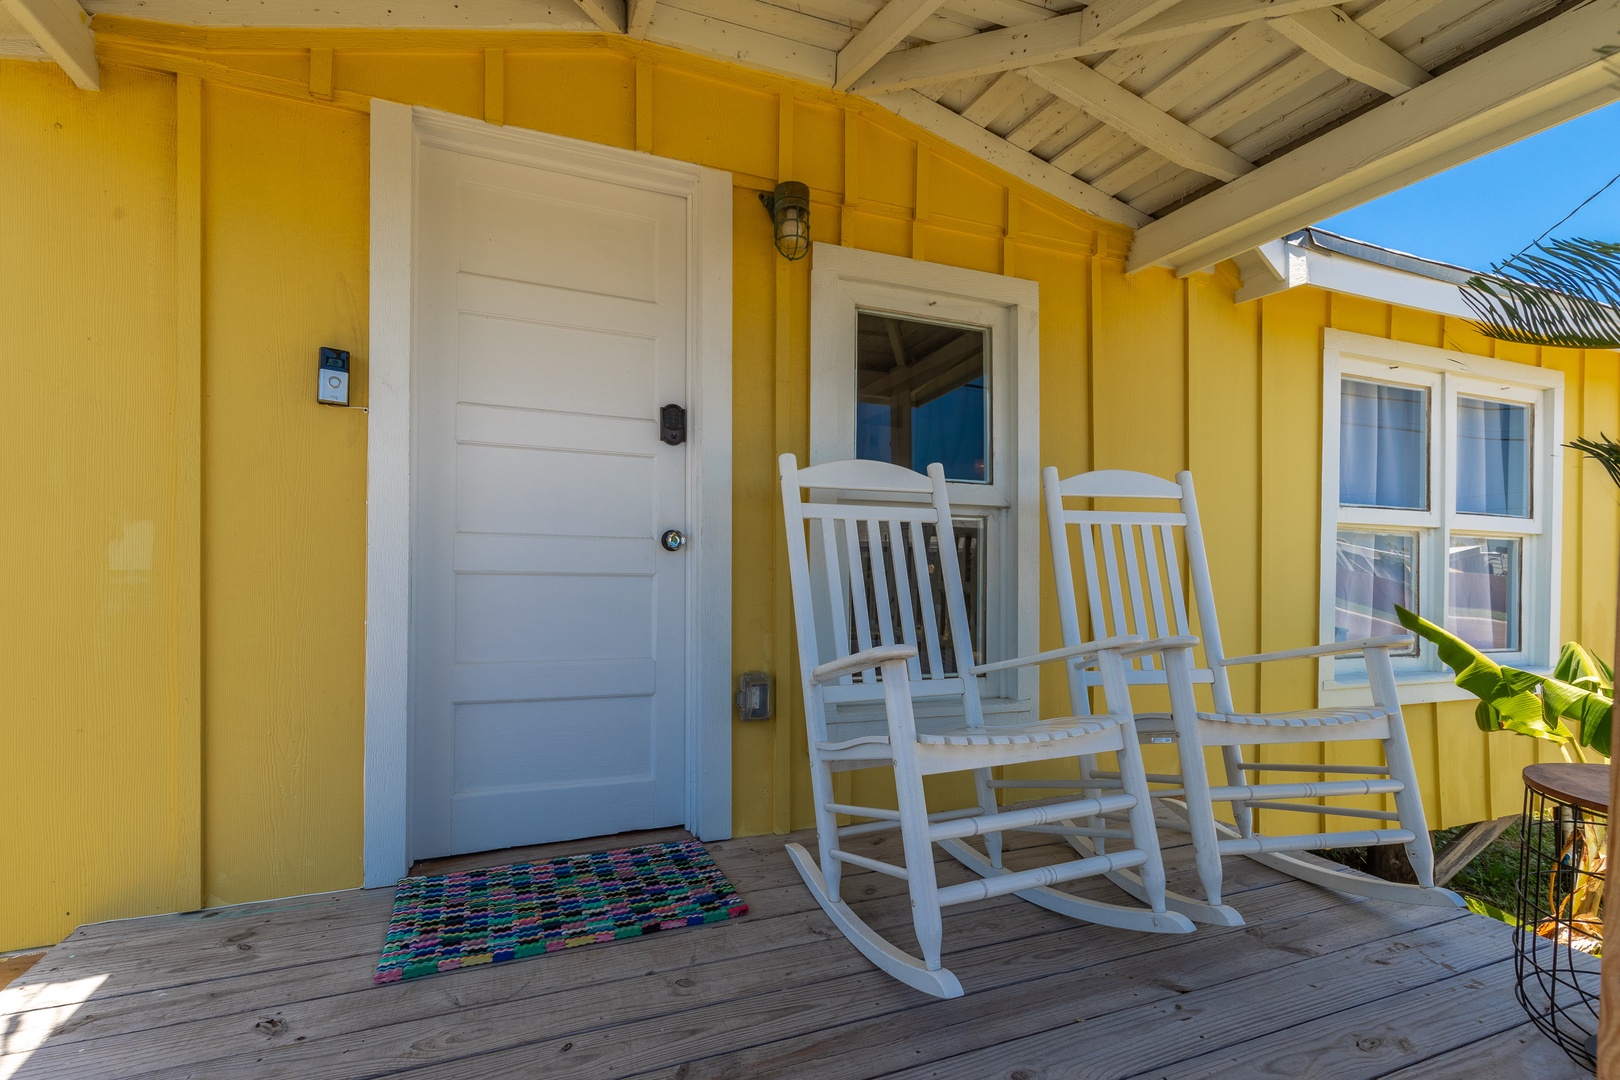 This beach bungalow is equipped with keyless entry for guest convenience